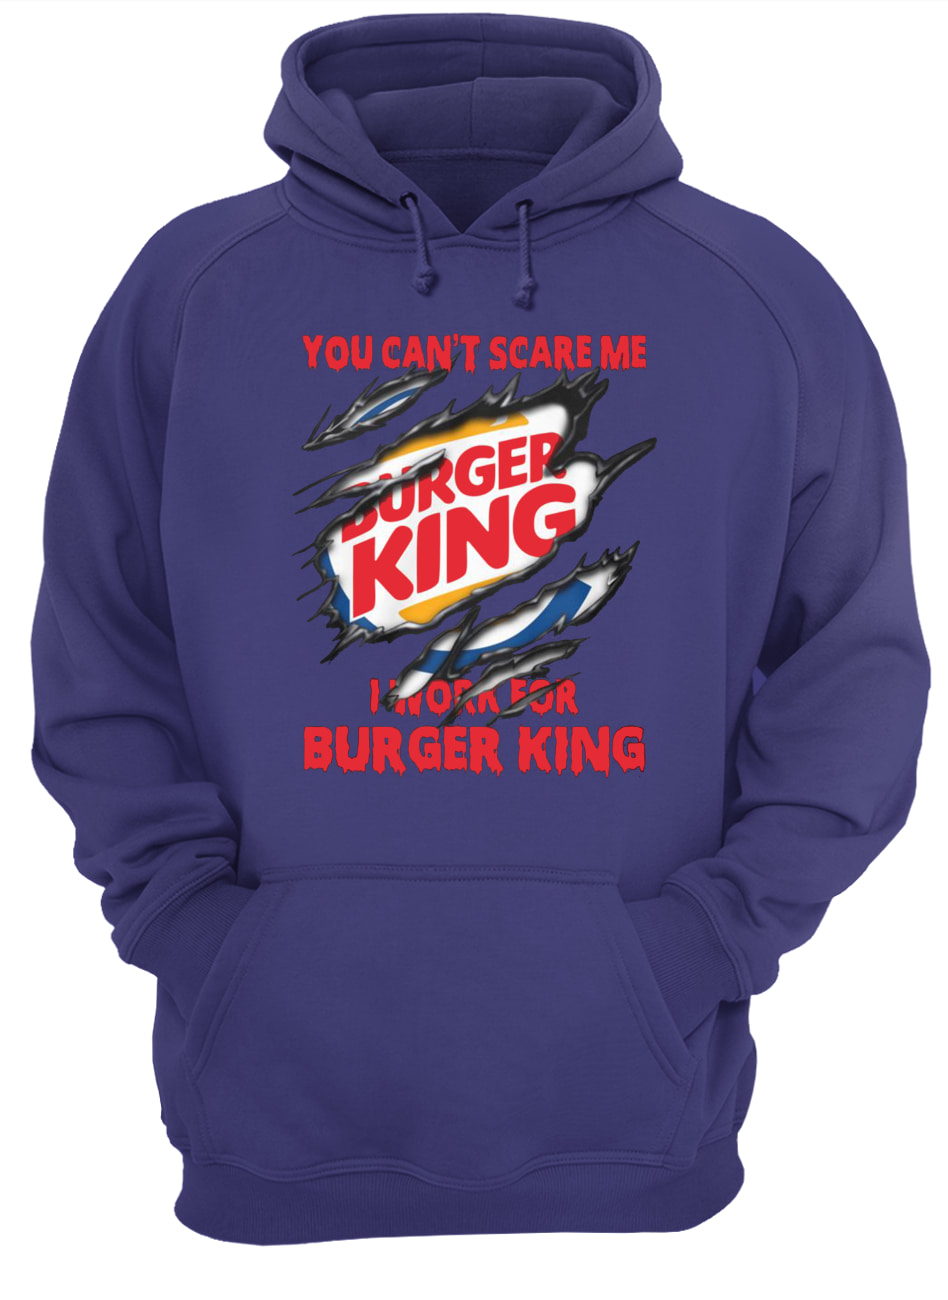 You can't scare me I work for burger king hoodie